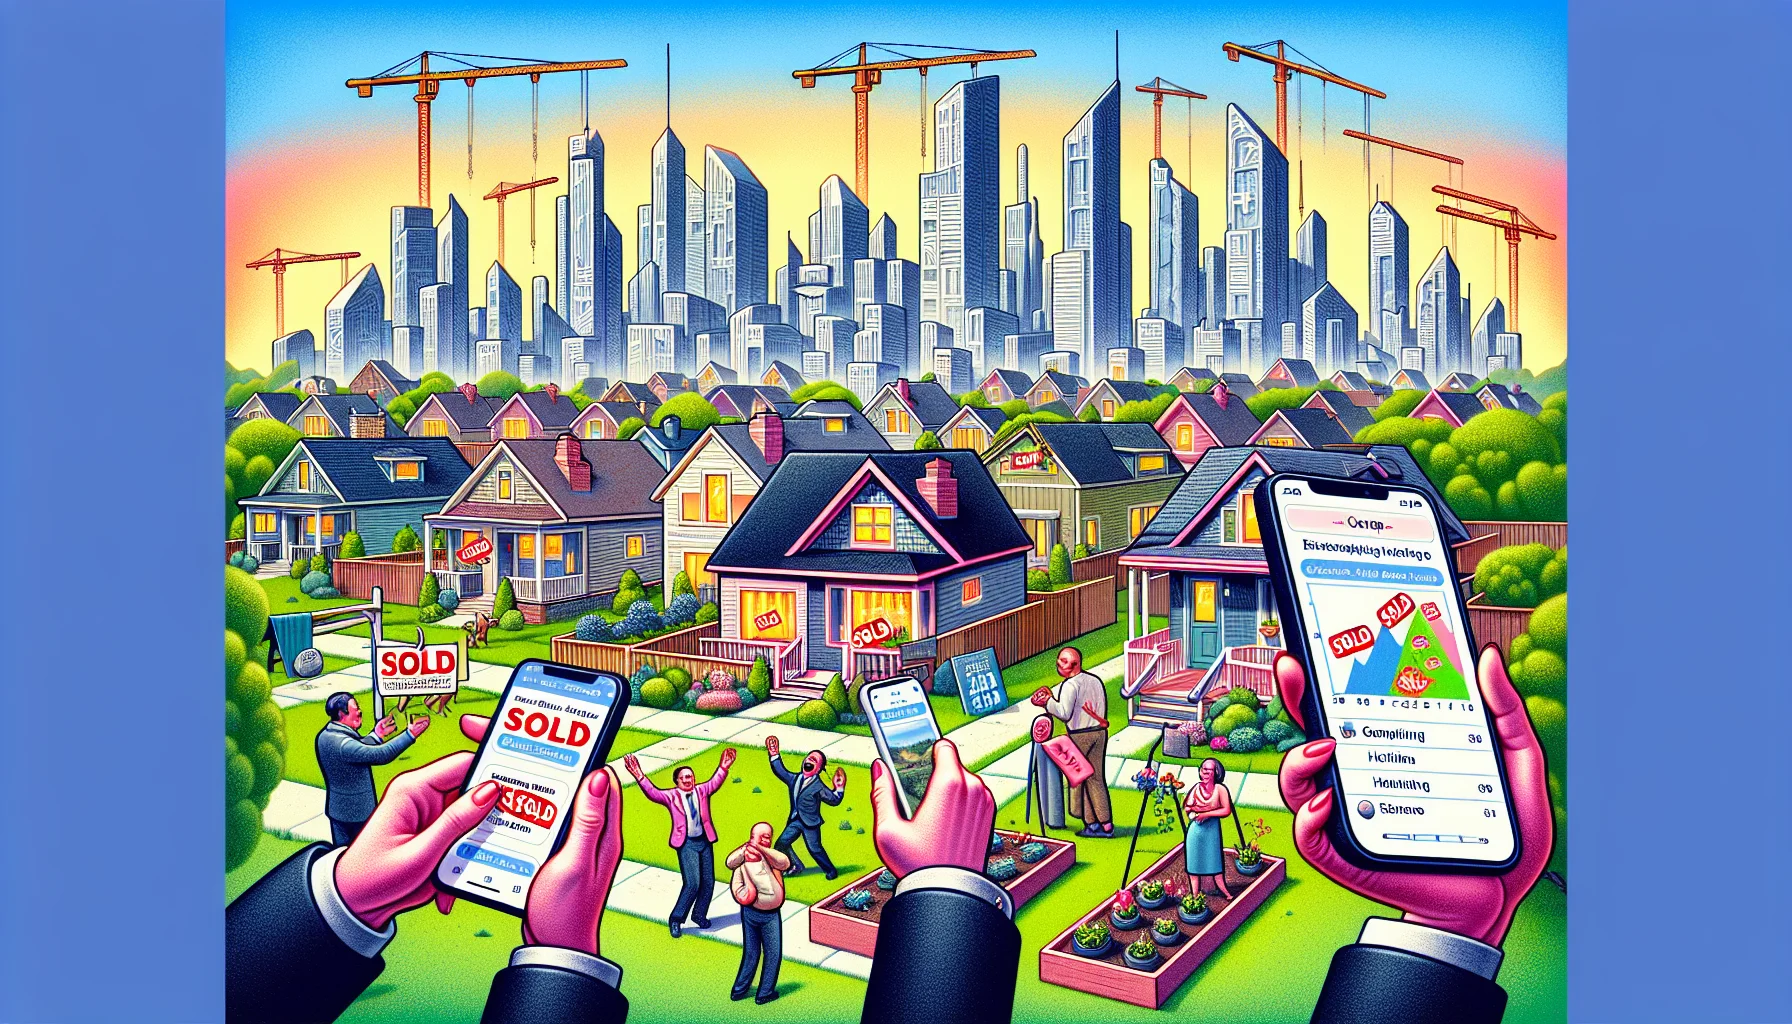 Envision an idyllic and humorous portrayal of the 2024 housing market. The scene depicts a bustling neighborhood, houses sporting 'Sold' signs even before completion, ecstatic estate agents high-fiving each other, and residents joyously gardening their newly acquired yards. Skylines are filled with cranes, indicating the boom in construction. Mobile application screens show the number of listings rapidly decreasing, while the property value chart is in a healthy state of incremental ascent. This scene reflects a perfect utopian version of the real-estate market, bringing smiles to all.